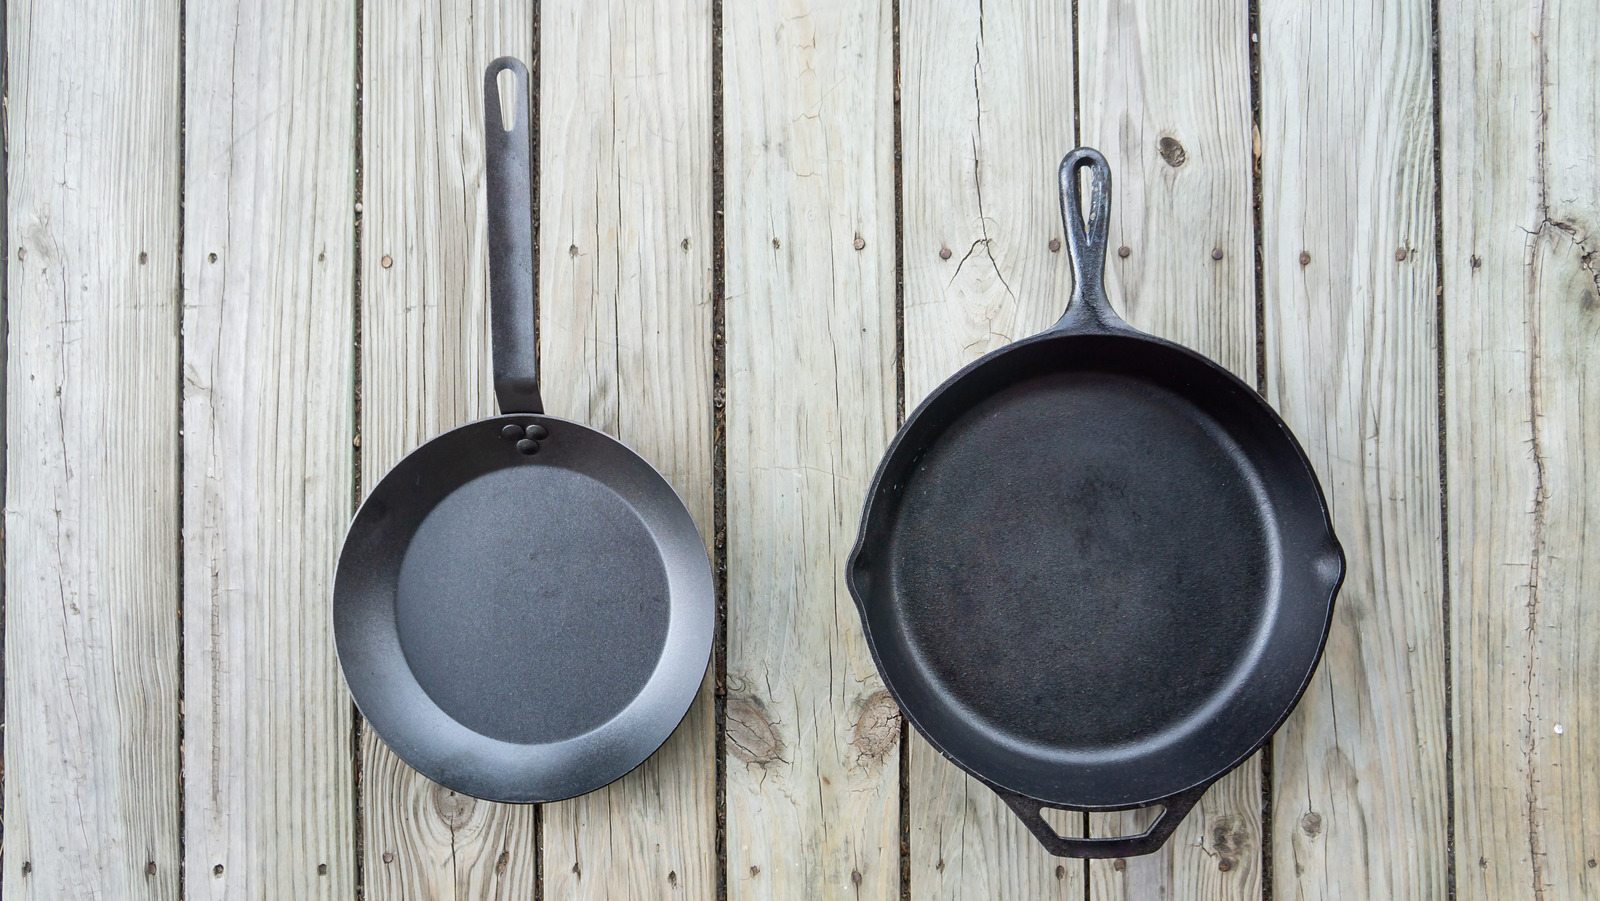 Pro Home Cooks  An Introduction to Carbon Steel Cookware